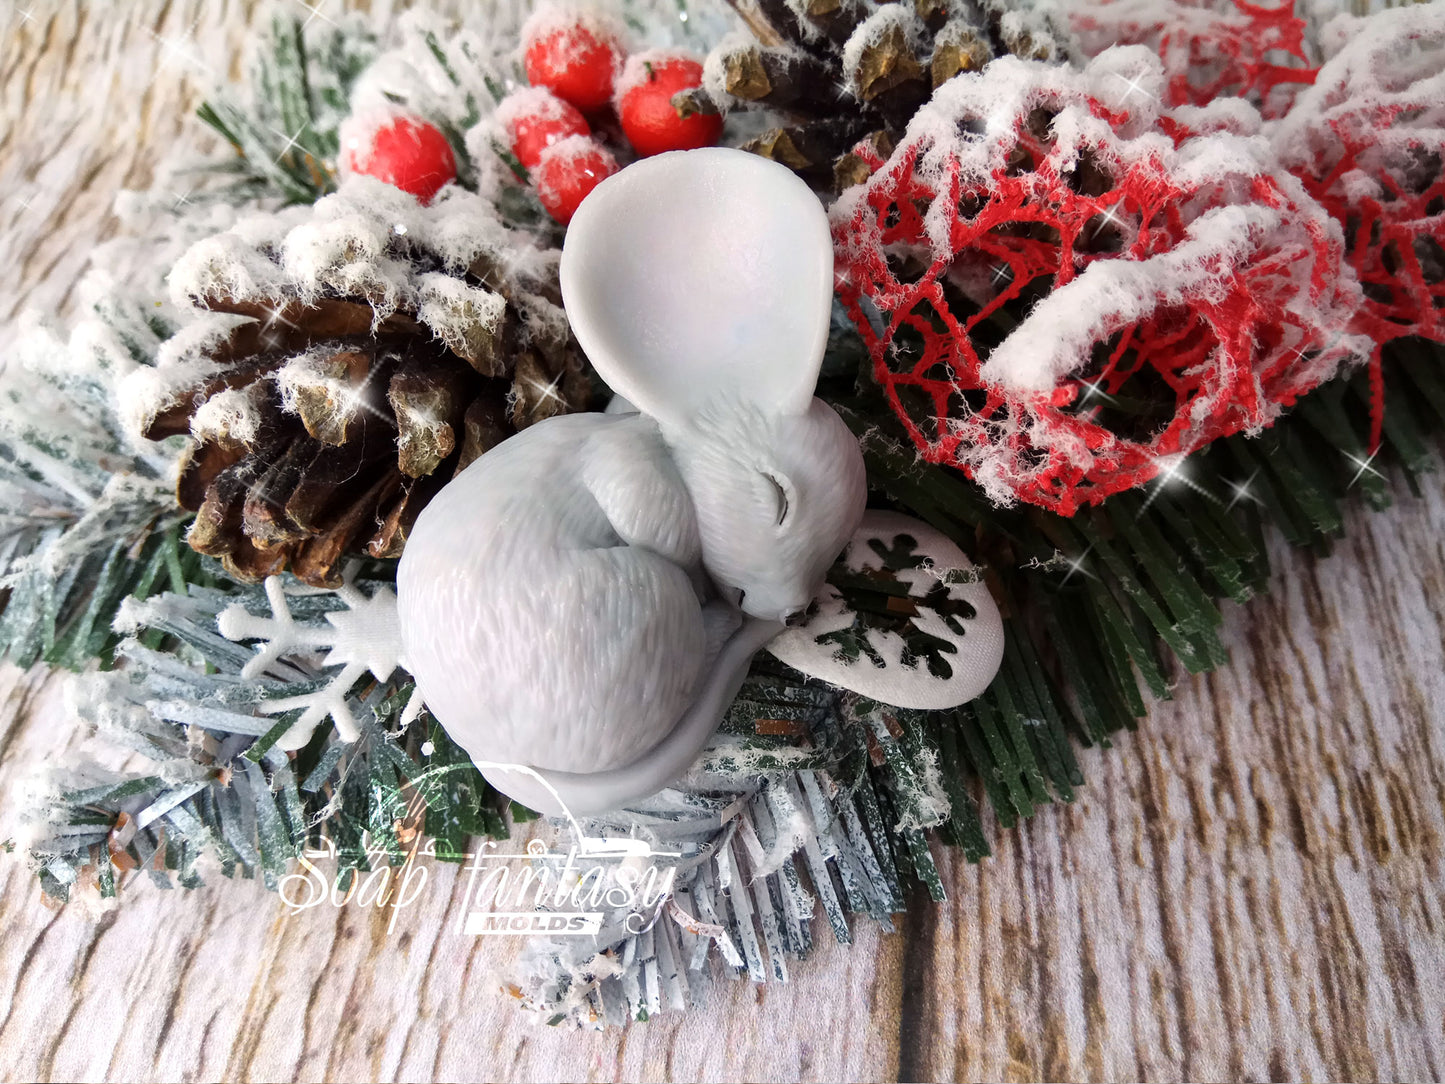 Sleeping little mouse silicone mold for soap making